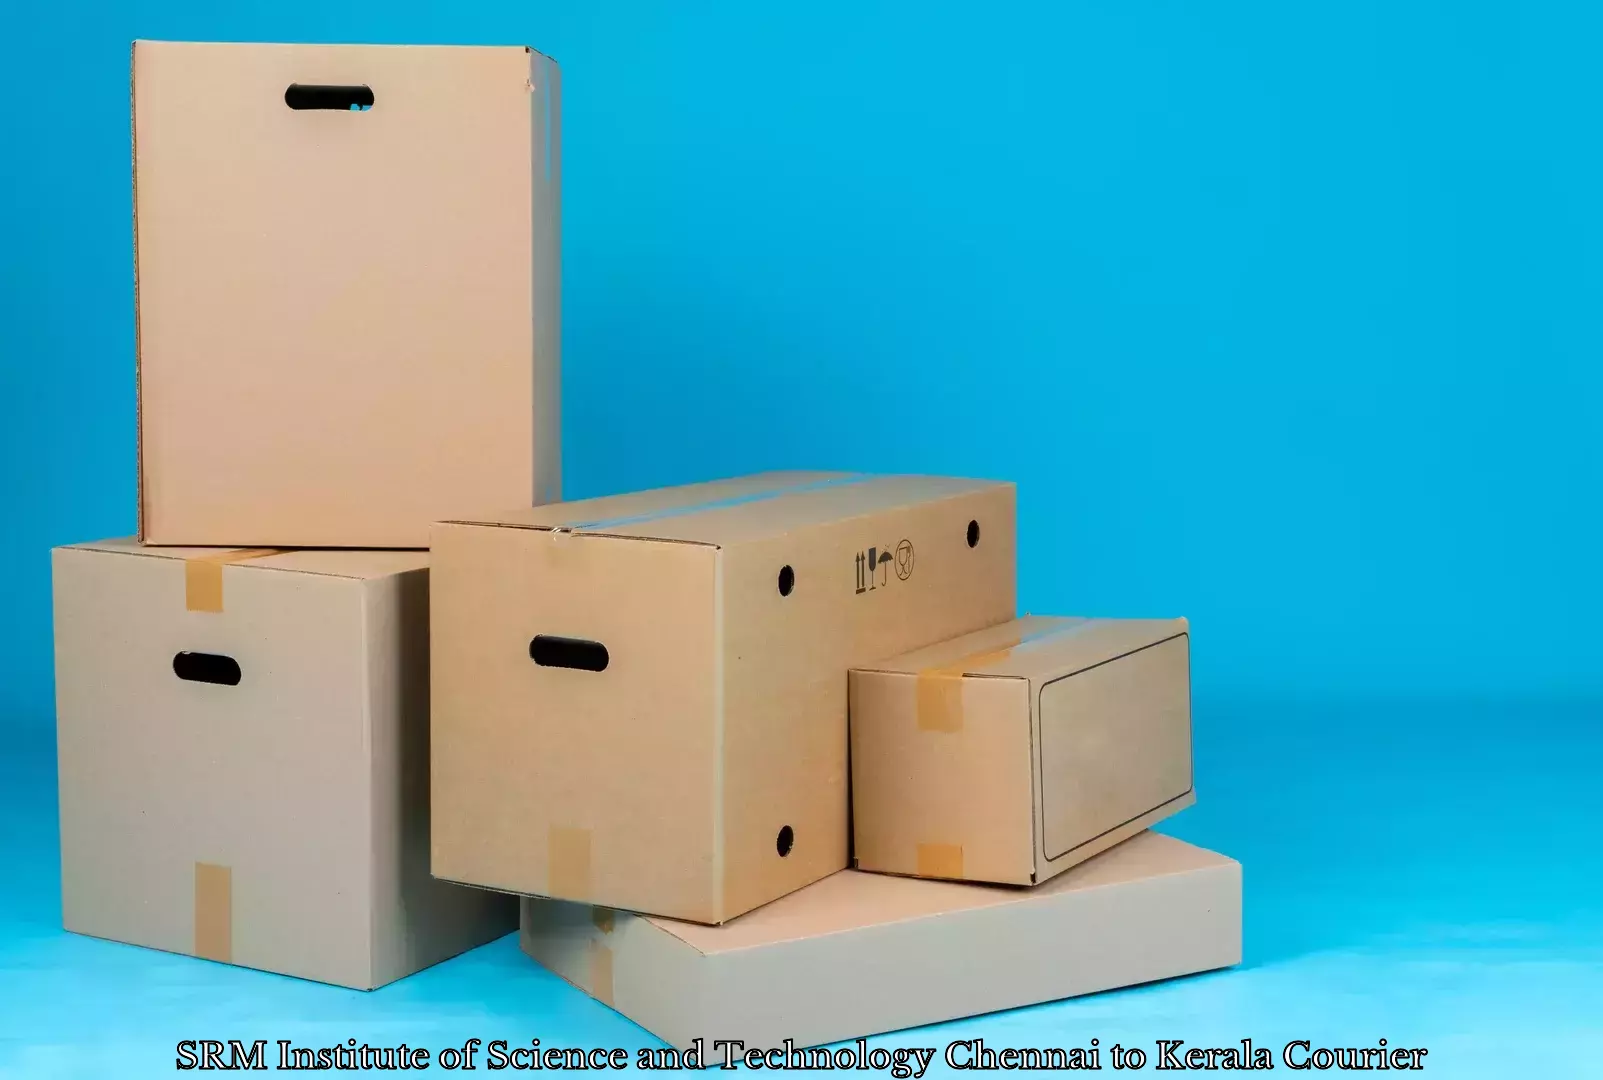 Furniture transport services SRM Institute of Science and Technology Chennai to Kerala